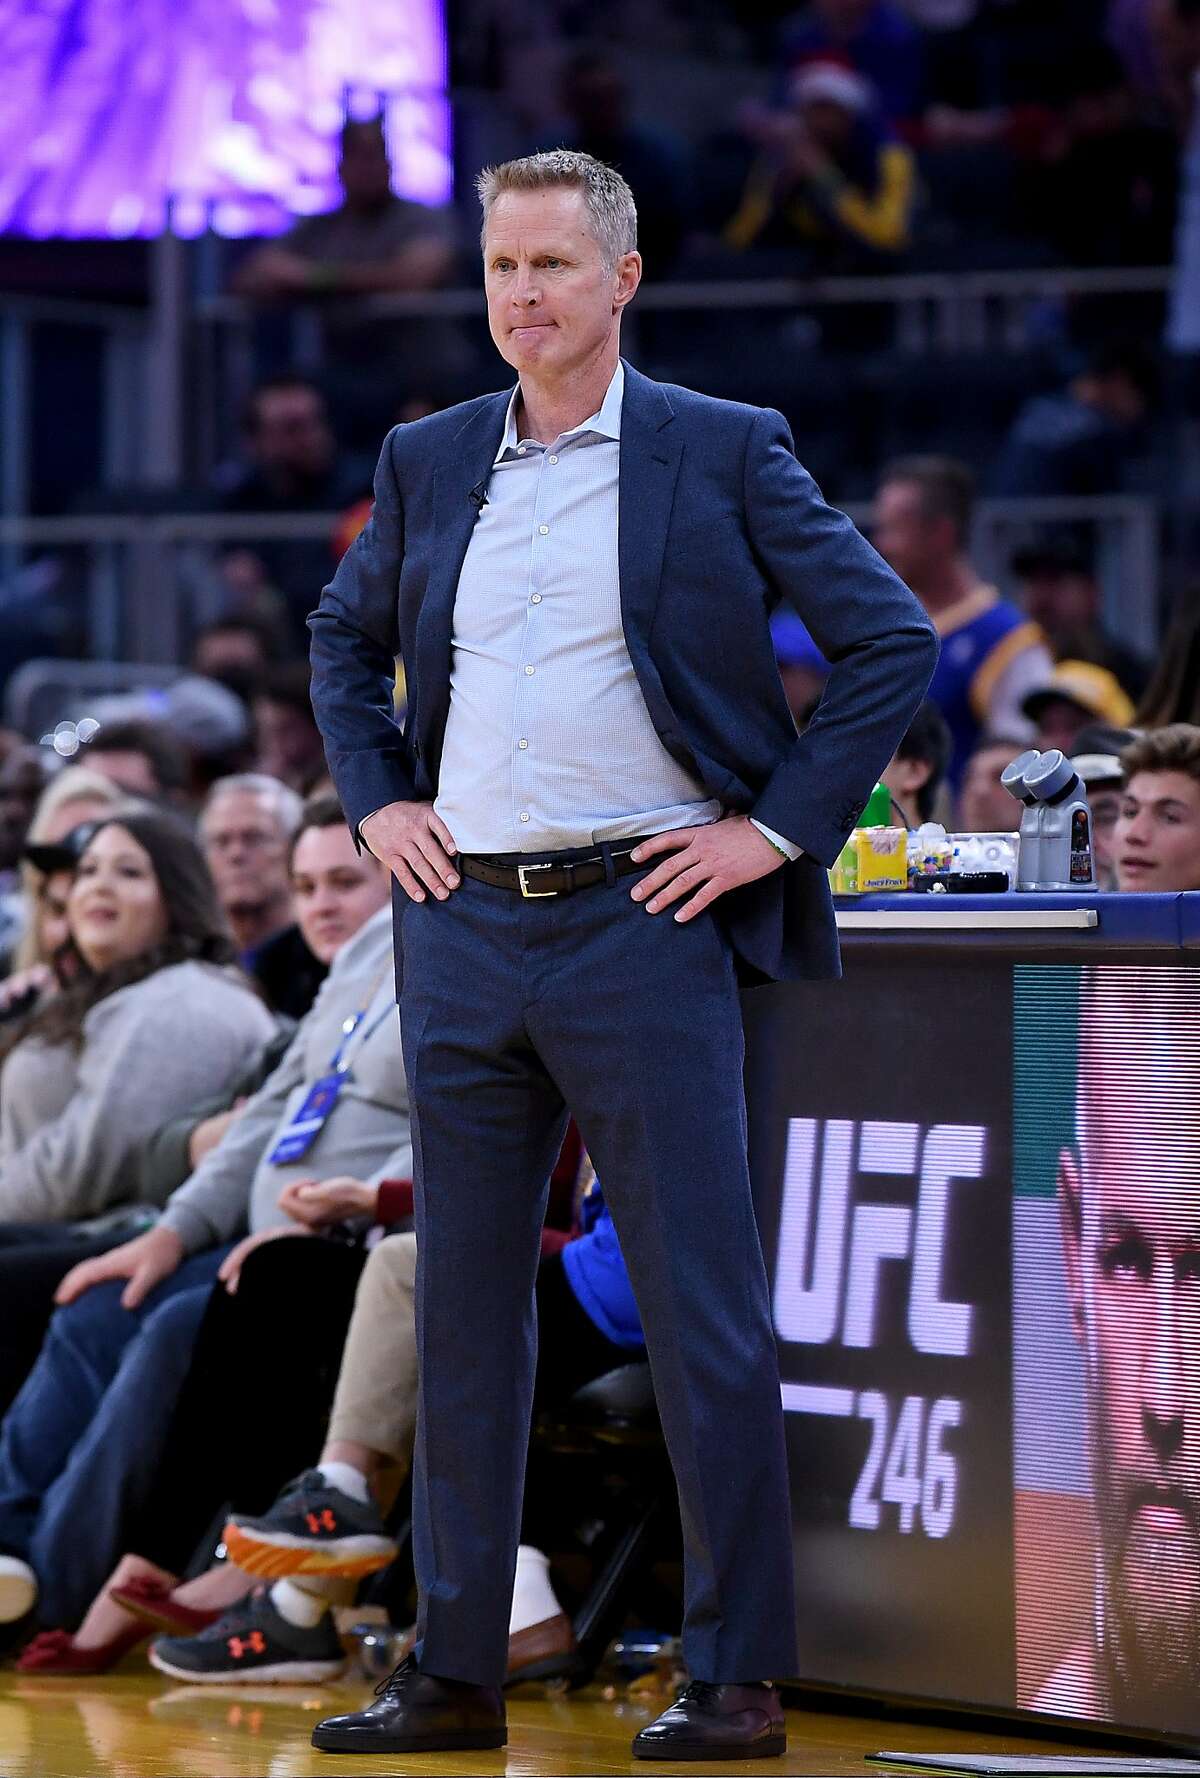 Head coach Steve Kerr of the Golden State Warriors looks on against the Houston Rockets during the second half of an NBA basketball game at Chase Center on December 25, 2019 in San Francisco, California.